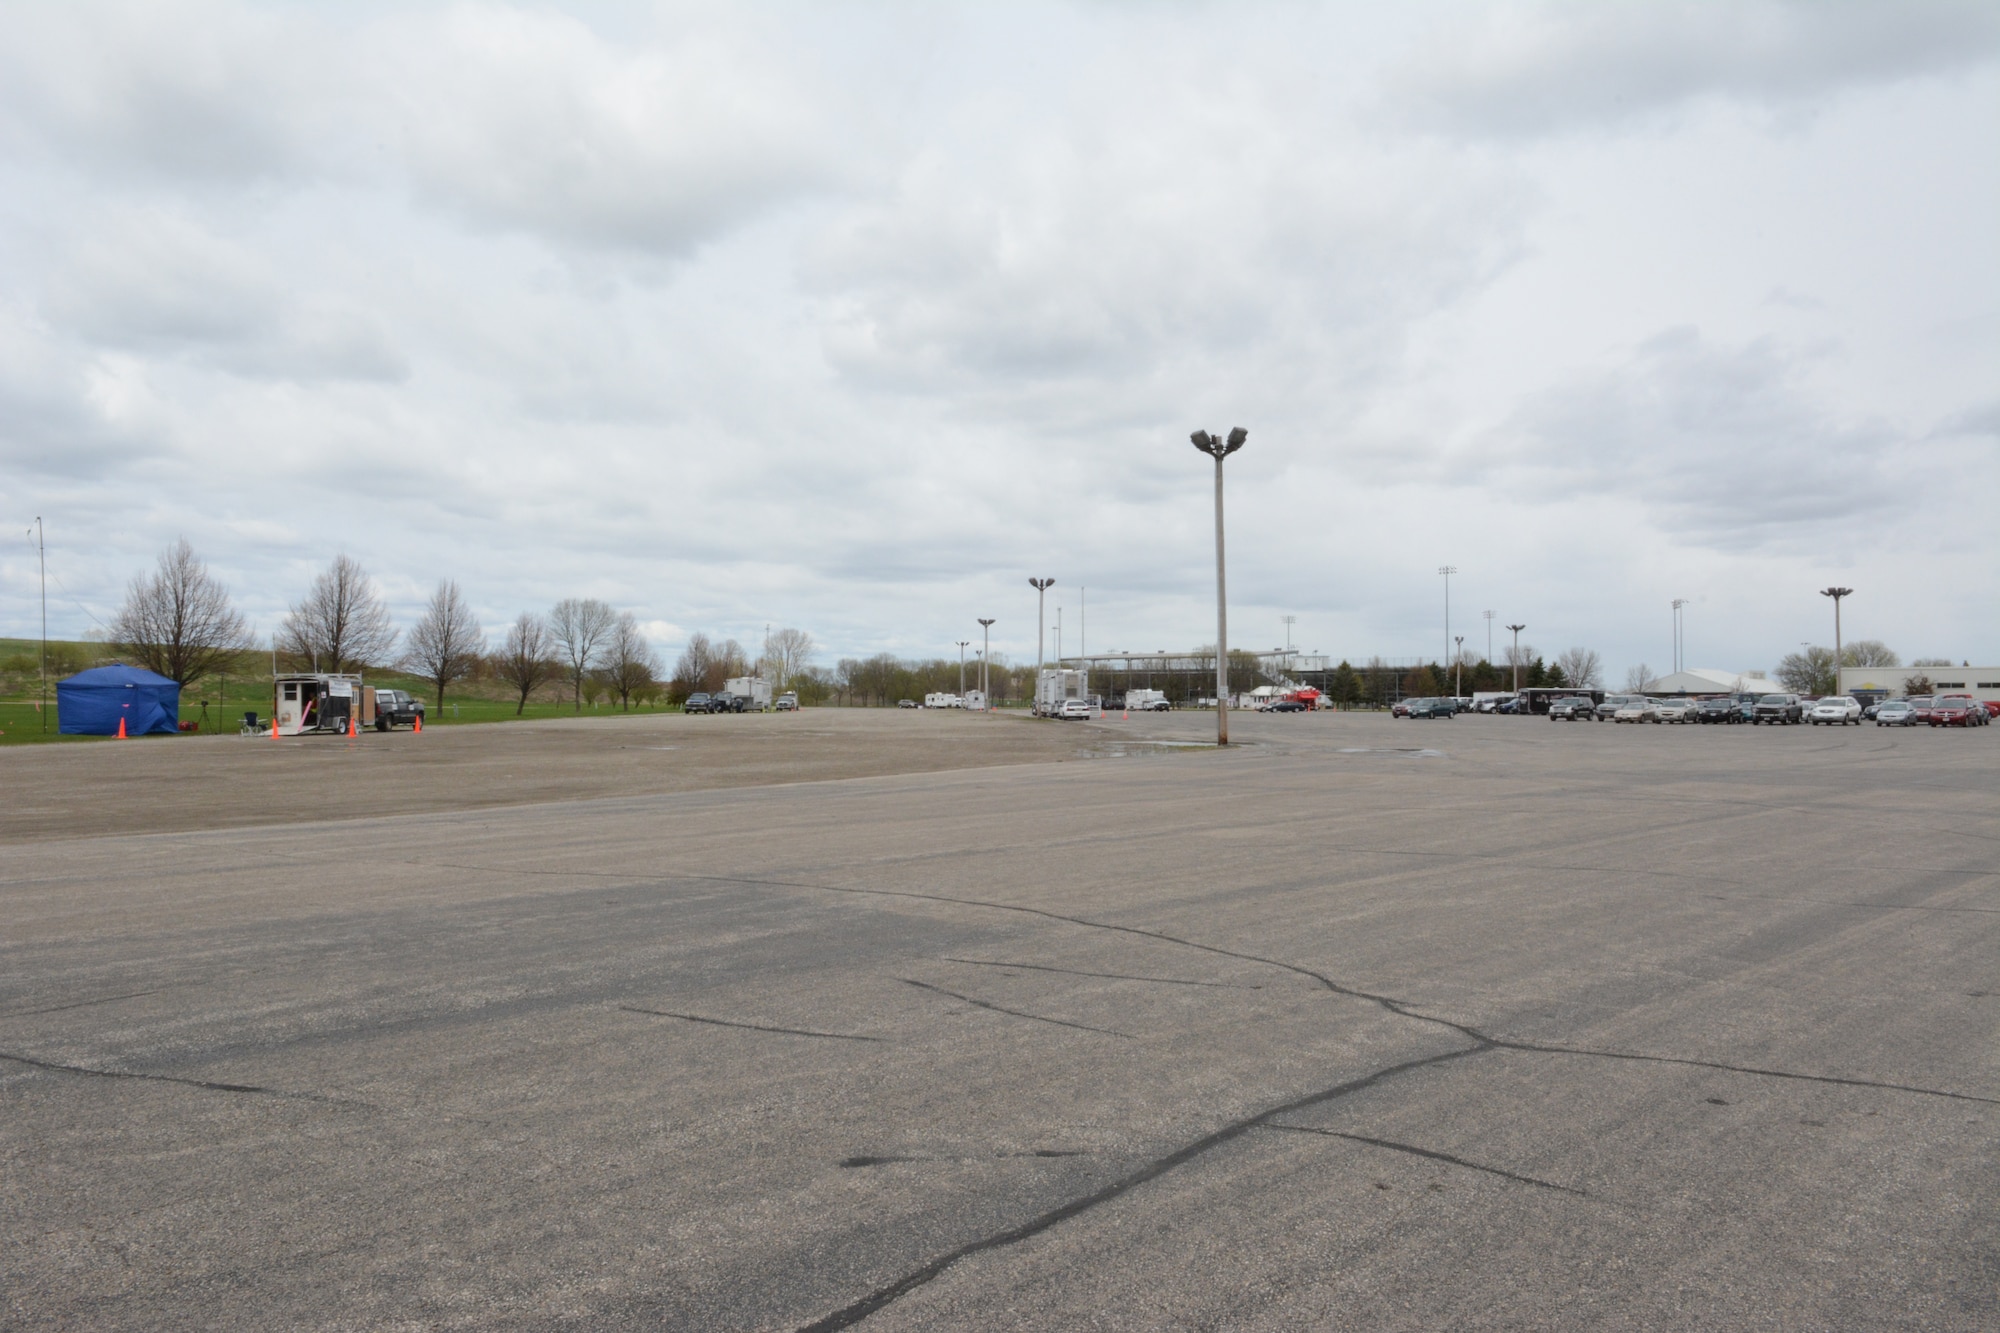 Mobile communication units were spread across the Sunnyview Exposition Center parking lot during the 2014 State Interoperable Mobile Communications Exercise in Oshkosh, Wis., May 15, 2014. More than 100 agencies from 34 communication platforms were in attendance. Members of the Wisconsin National Guard tested their ability to communicate with other agencies to ensure everything worked properly should an emergency situation arise. (Air National Guard photo by Senior Airman Andrea F. Liechti)